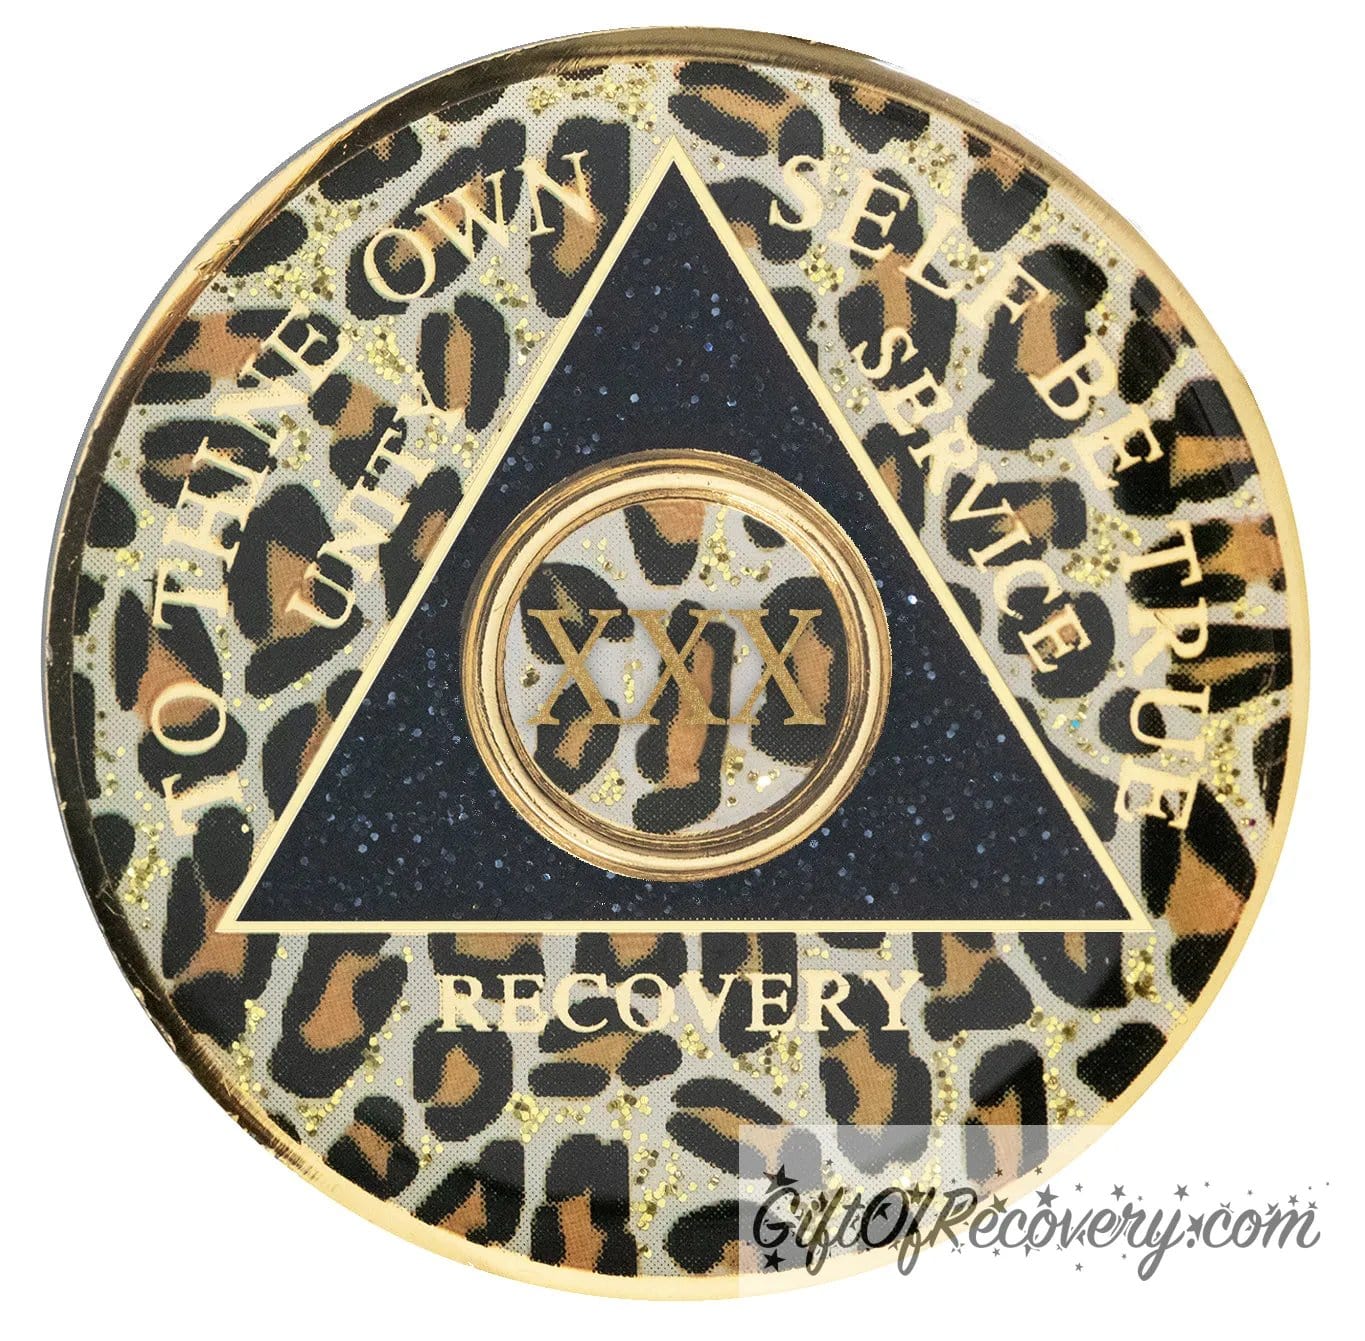 30 year AA medallion leopard print with gold flaked spots, to thine own self be true, unity, service, recovery, and roman numeral are gold foil so you can let your recovery shine, not your time, the circle triangle is embossed with 14k gold-plated brass, the recovery medallion is sealed with resin for a shiny finish.